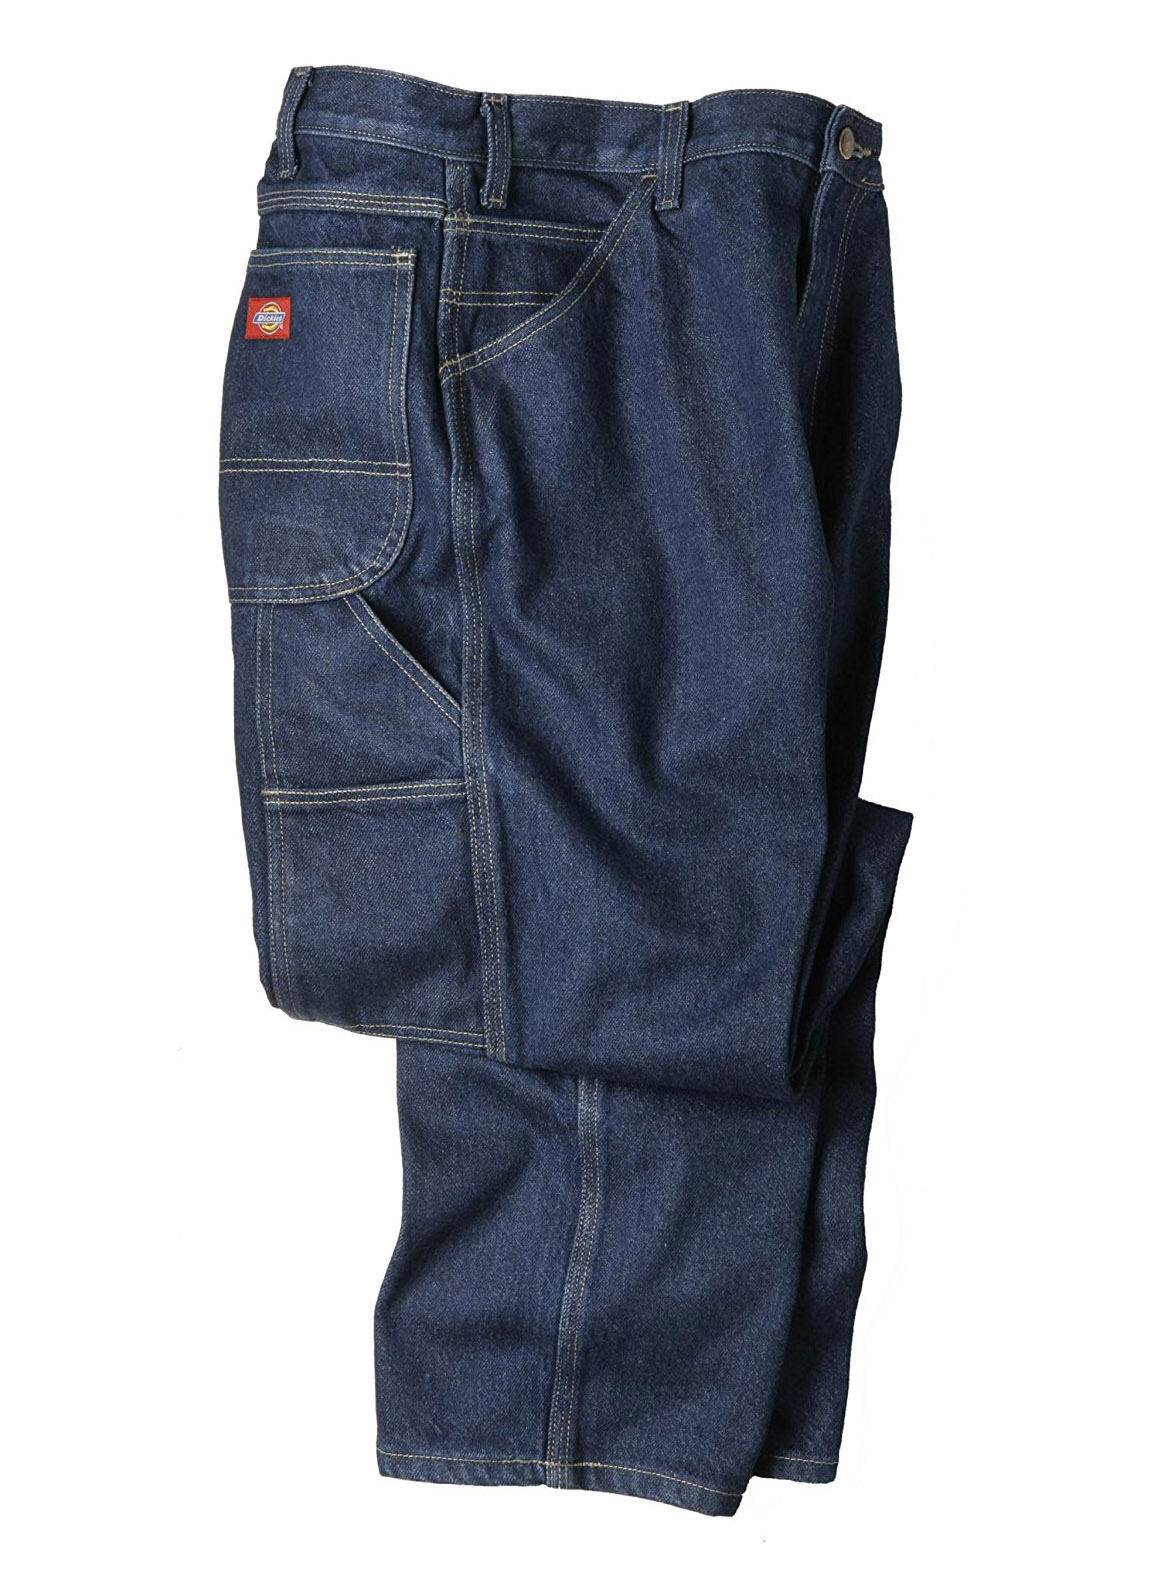 durable work jeans